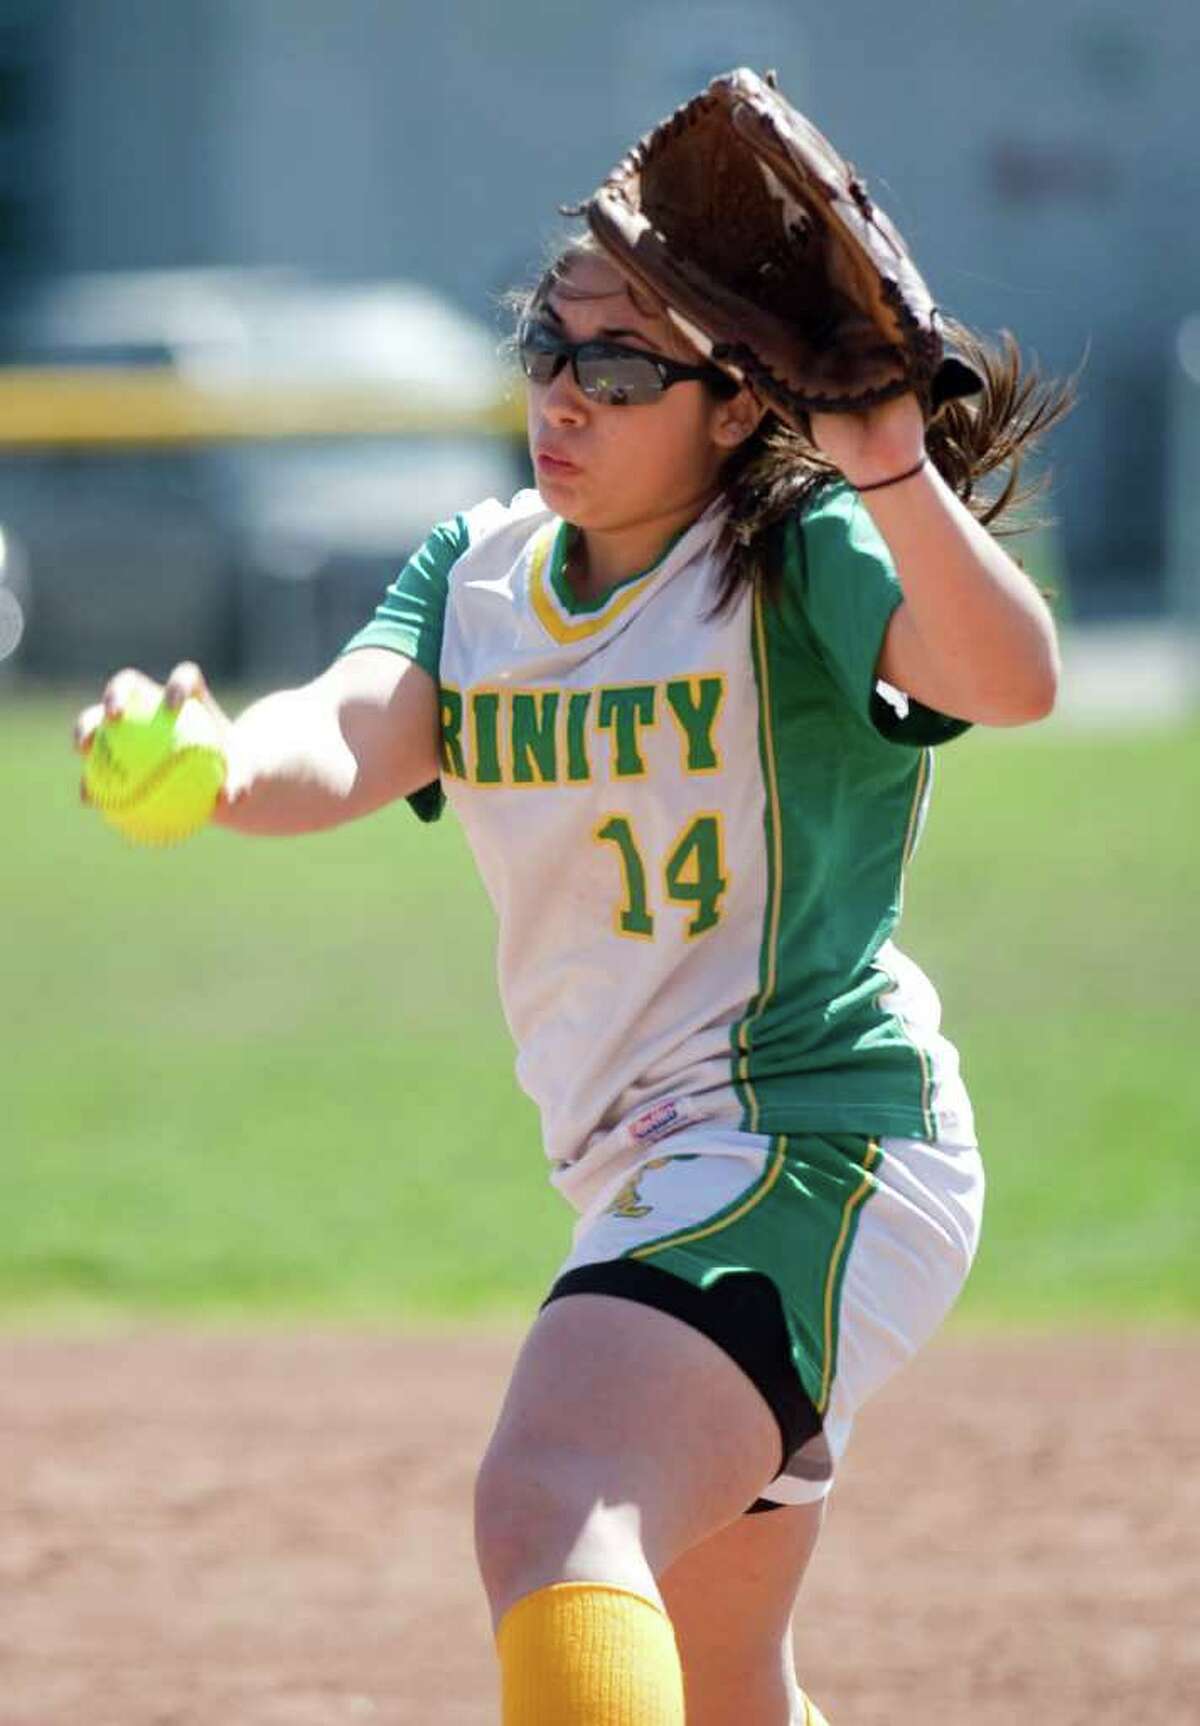 Trinity Catholic's Krissy Schule delivers to the plate against Westhill in softball action in Stamford, Conn. on Saturday April 9, 2011. Westhill won 6-0.